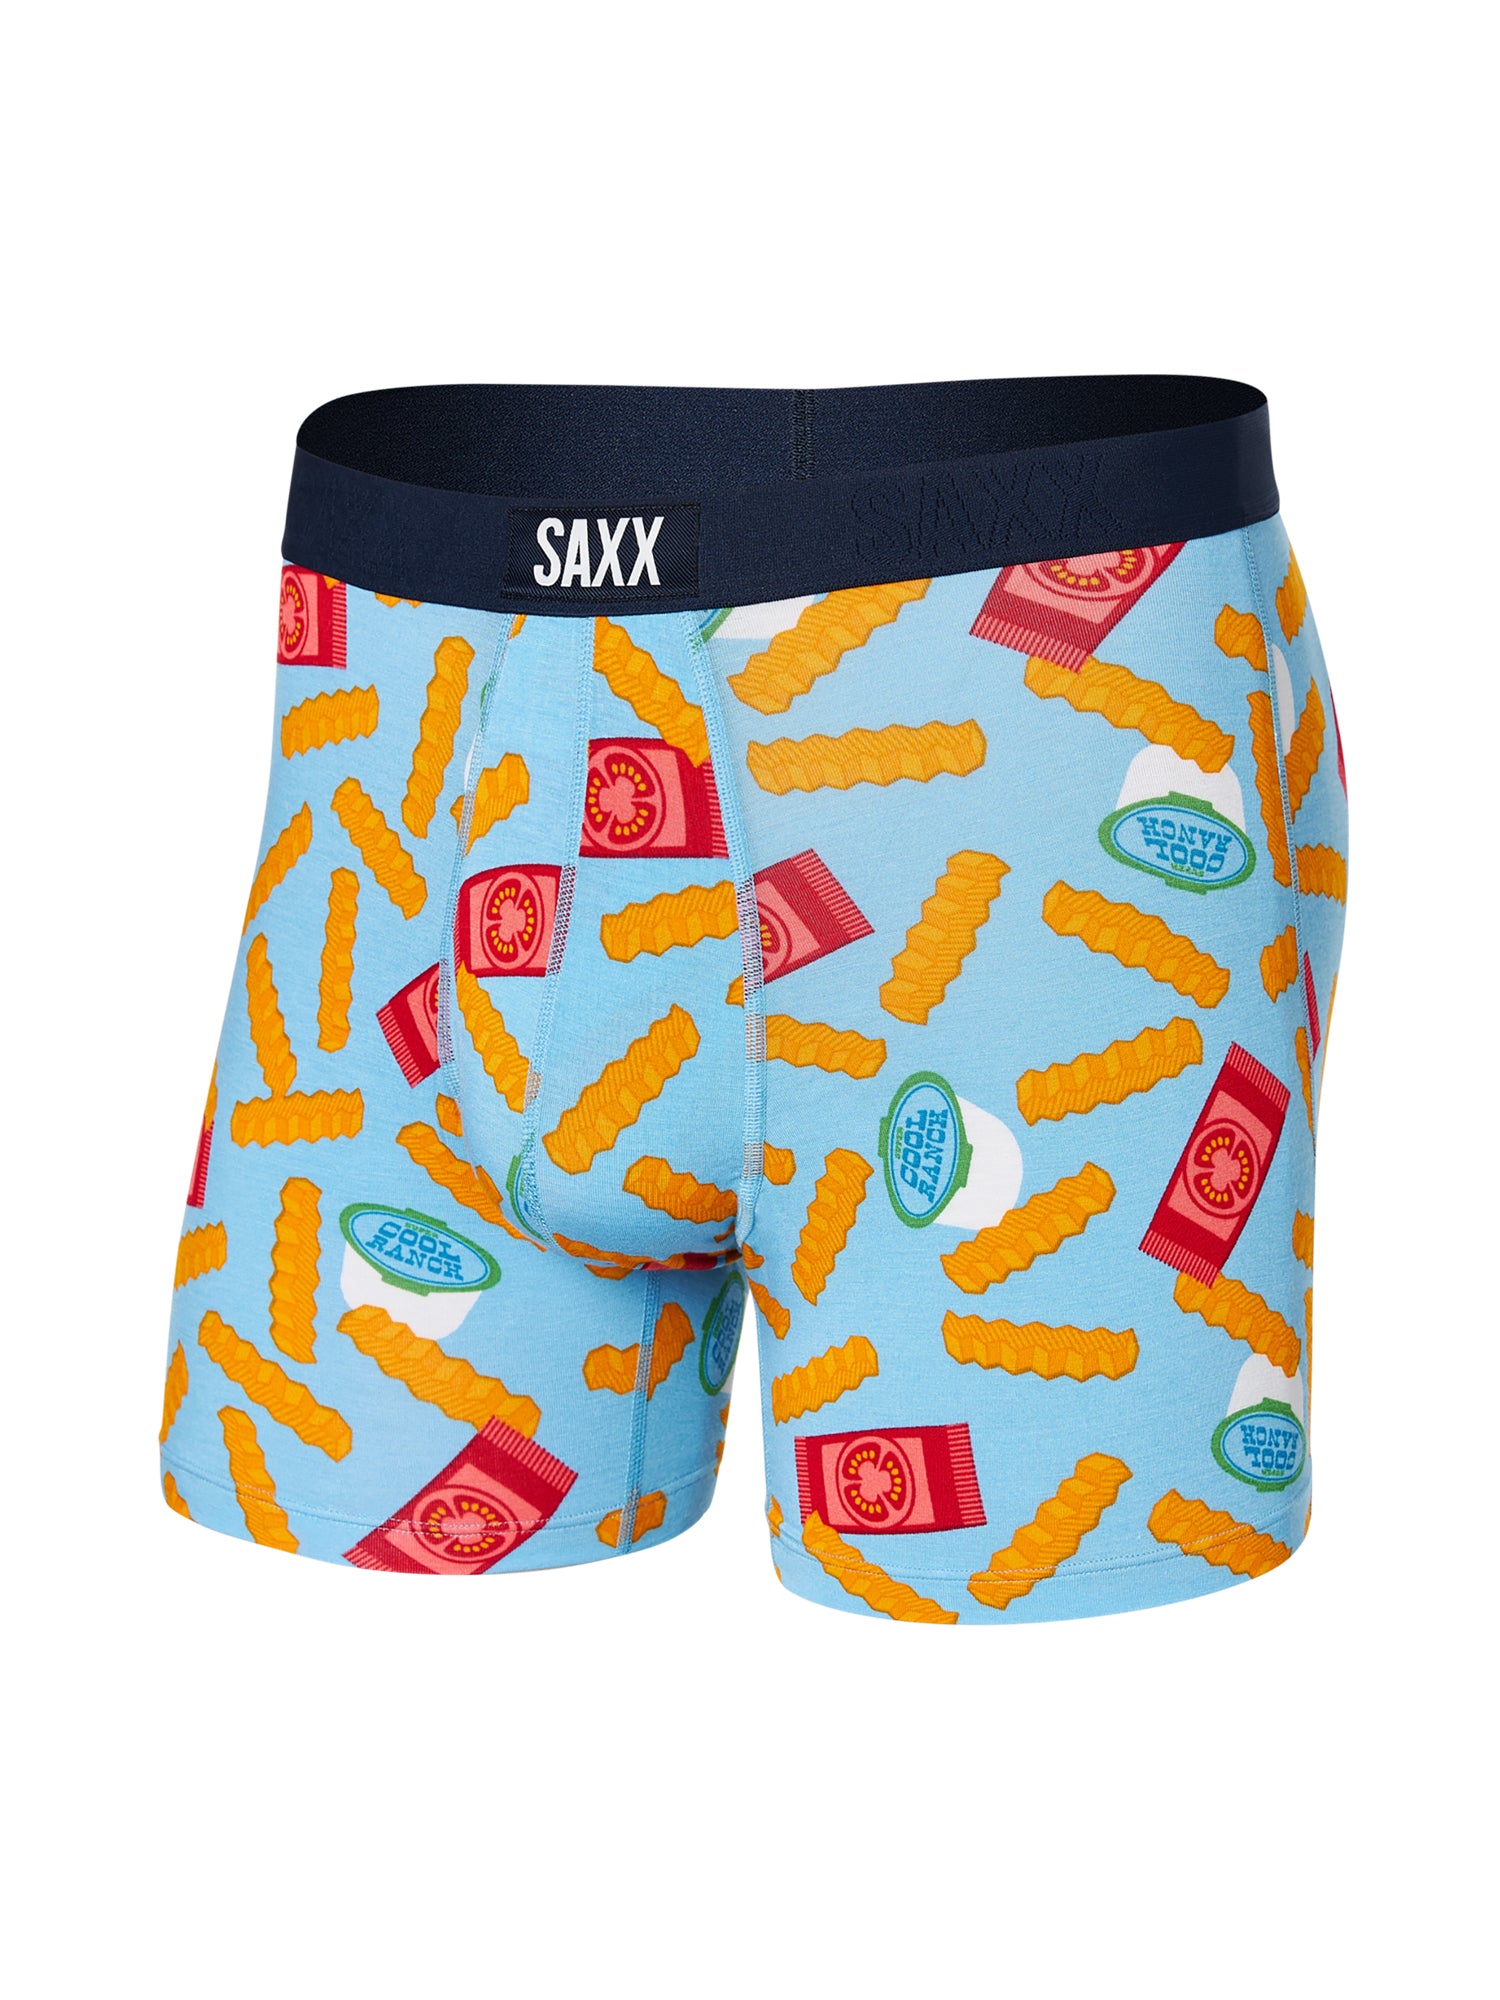 Boathouse SAXX VIBE BOXER BRIEF - HAPPY CAMPER CLEARANCE